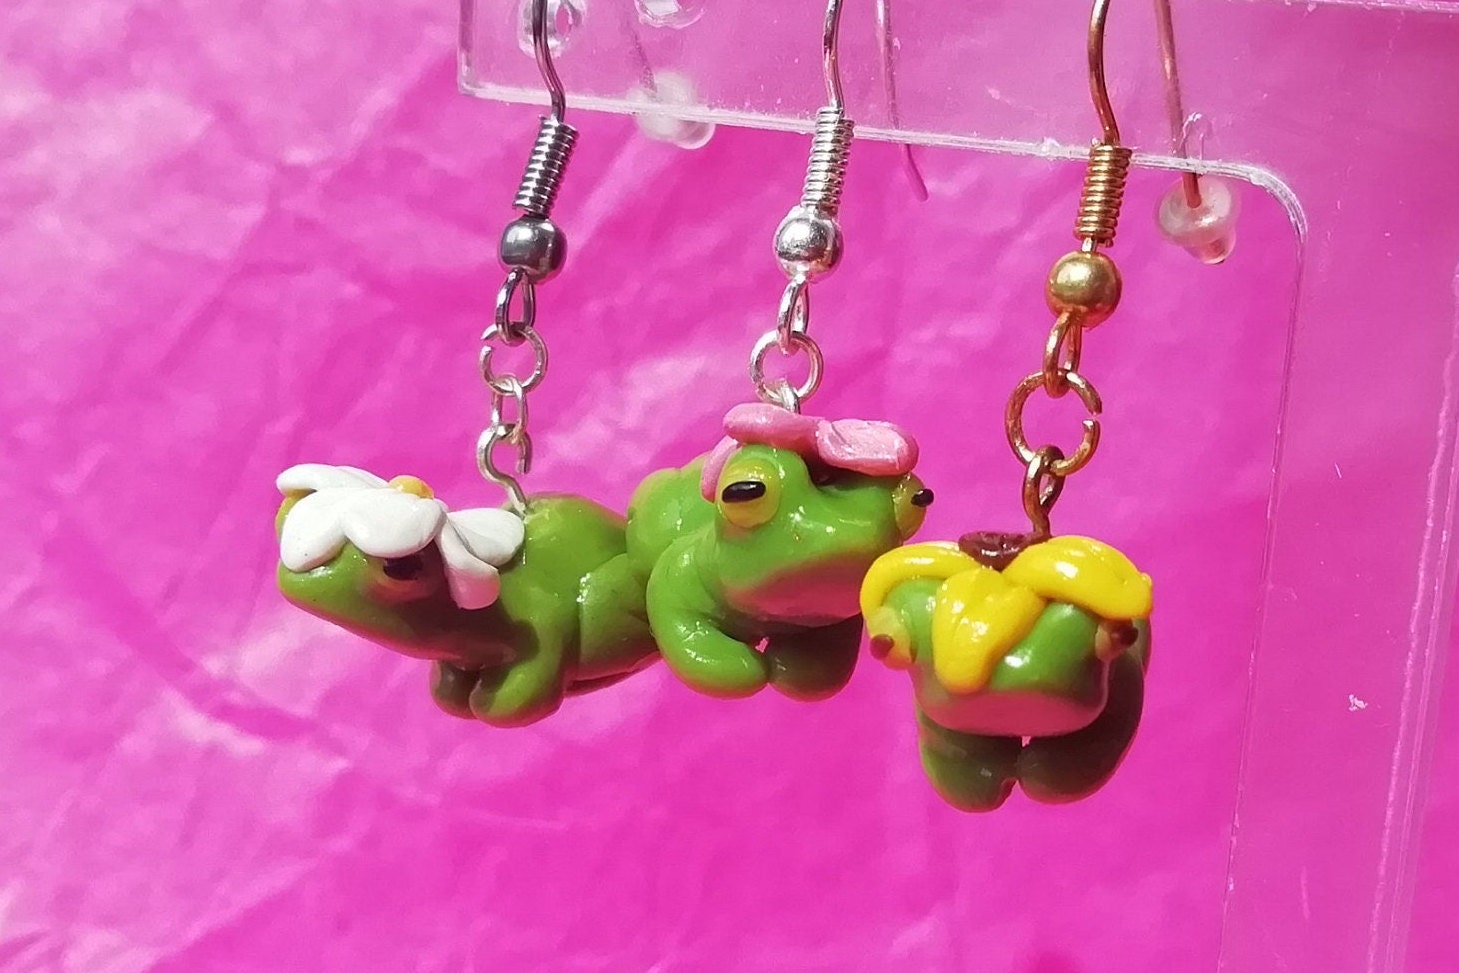 Frog with Flower Earrings hand sculpted charm dangle | Etsy